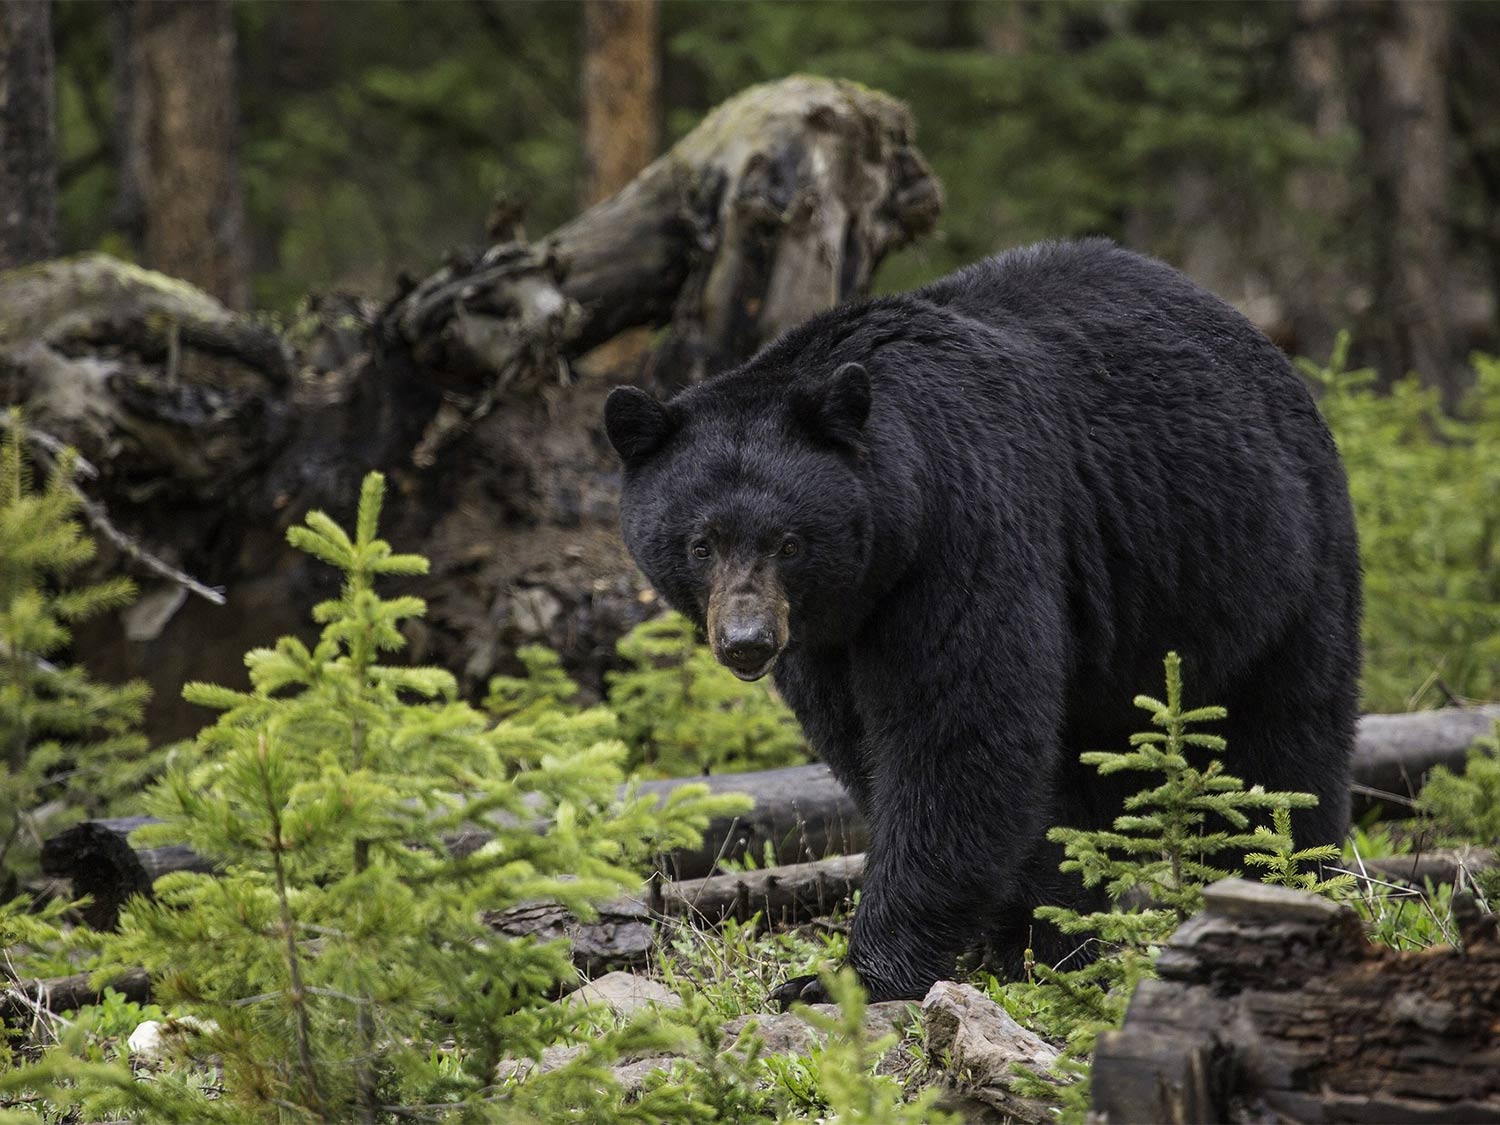 Black bears are capable of sprints up to 30 mph.